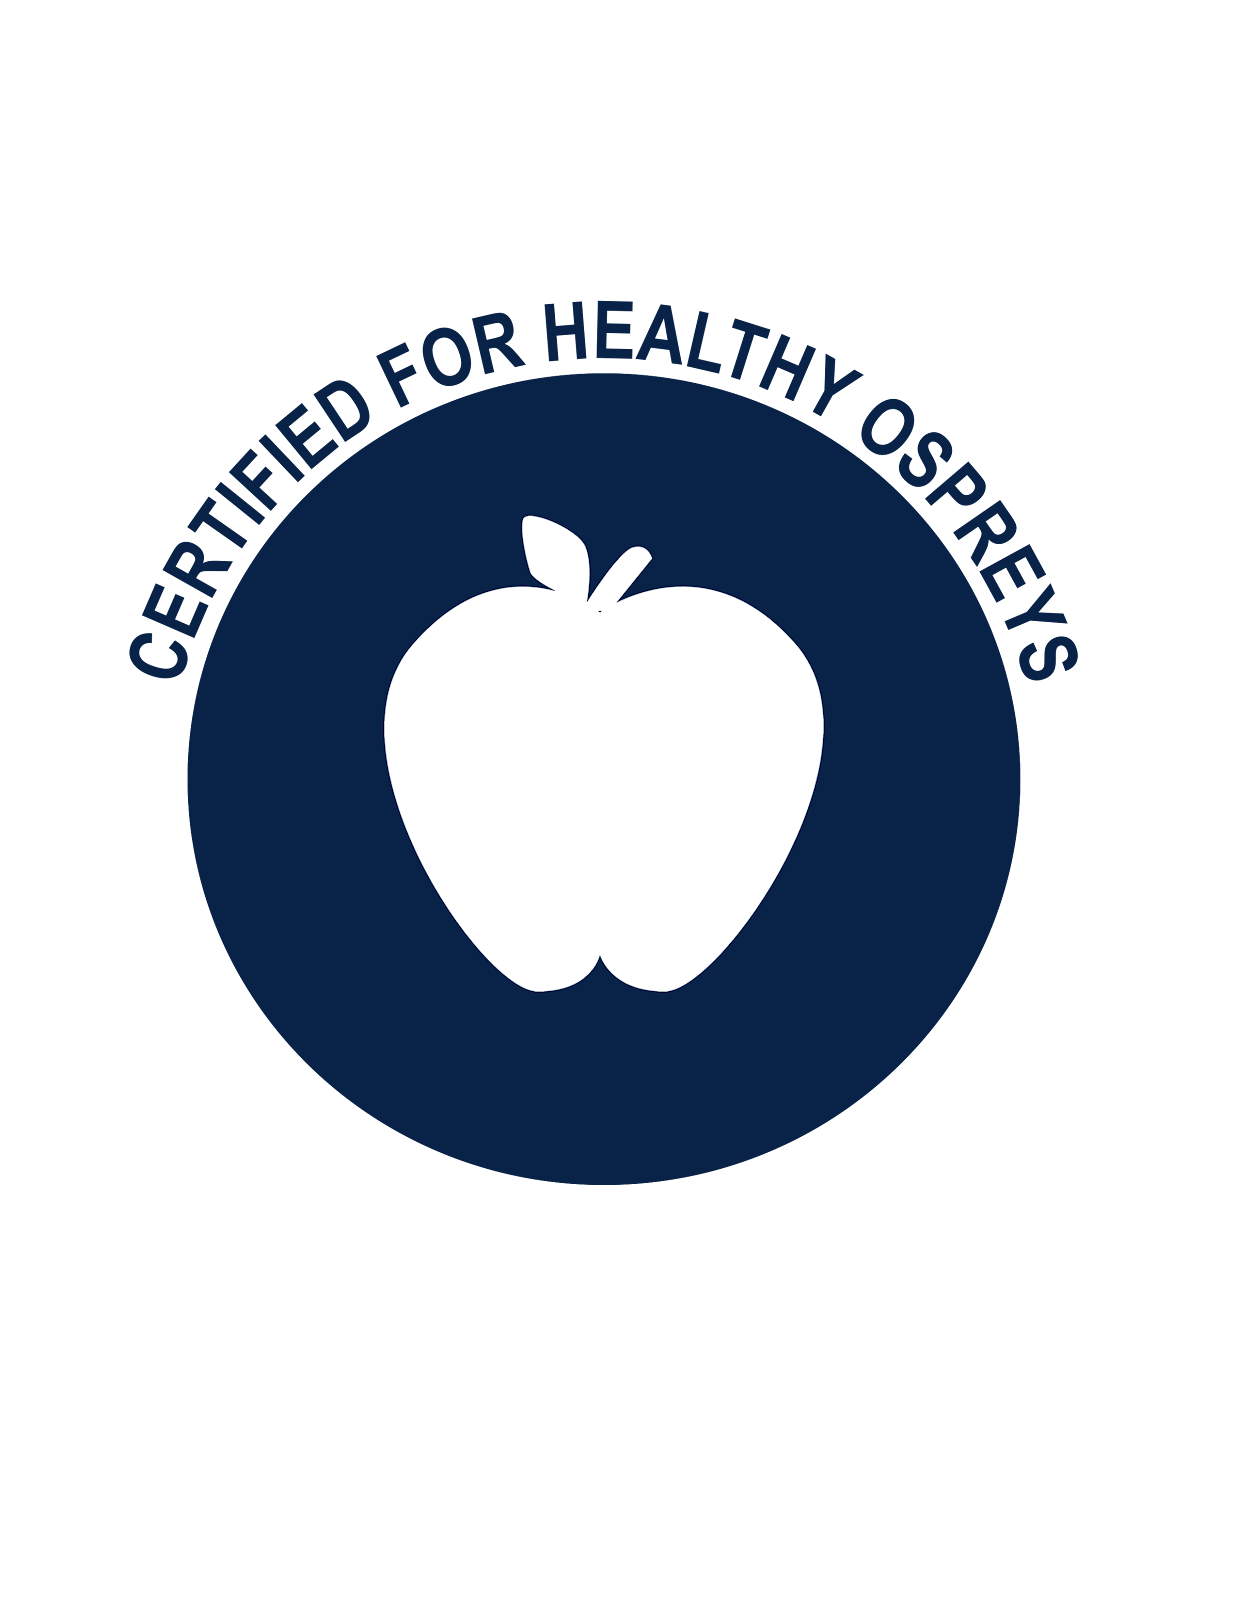 Certified for Healthy Ospreys text with picture of apple